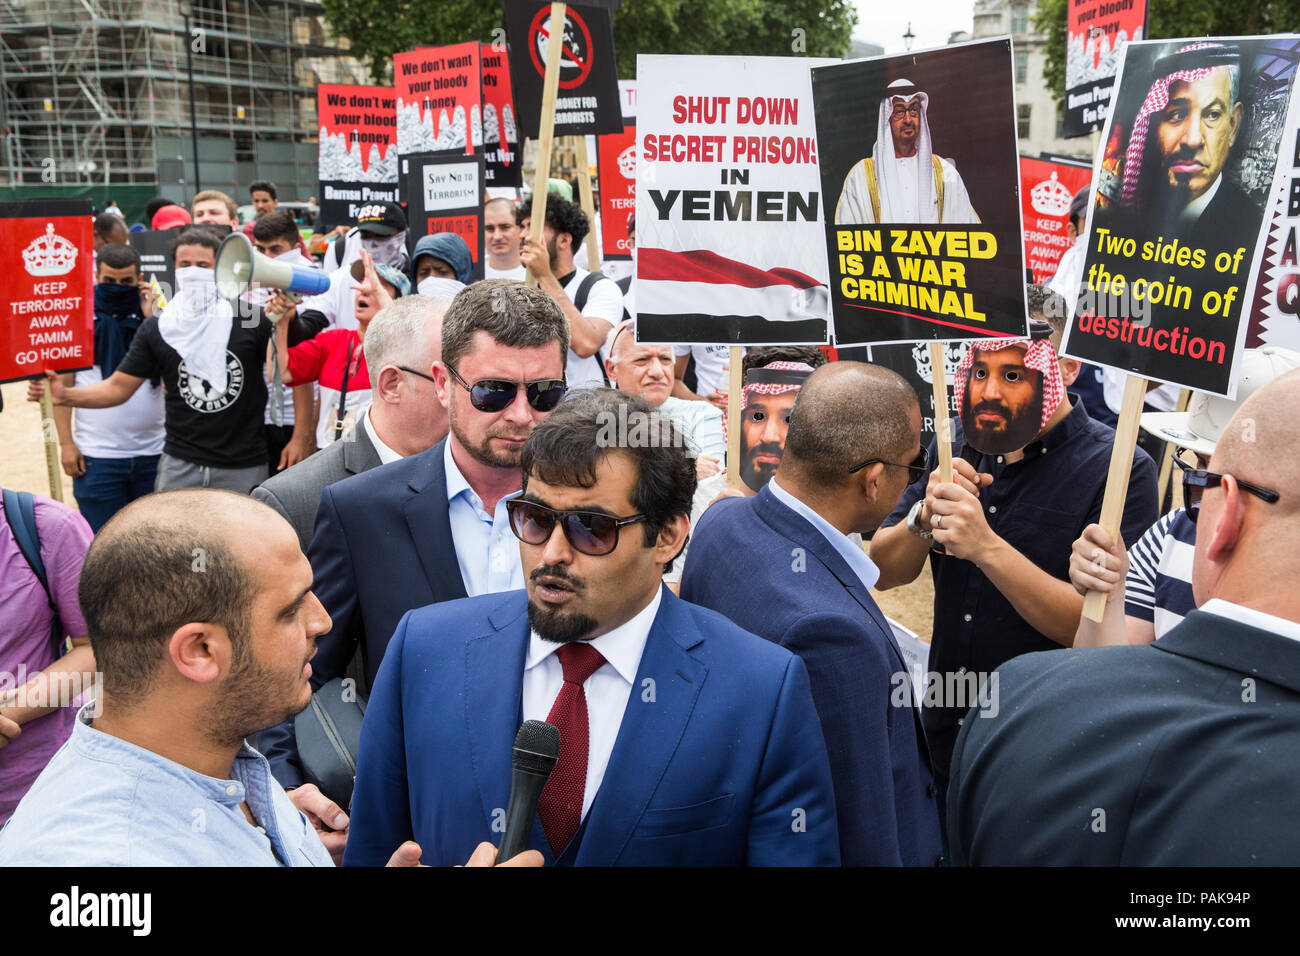 London, UK. 23rd July, 2018. Khalid Al-Hail, founder and president of the Qatar National Democratic Party (QNDP), speaks to the media in front of a protest by opponents of a visit to the UK by Qatar’s Emir Tamim Bin Hamad Al Thani in Parliament Square against Qatari support for extremist and terrorist groups. There was also a smaller counter-protest. Emir Tamim is expected to meet Prime Minister Theresa May during his visit. Credit: Mark Kerrison/Alamy Live News Stock Photo